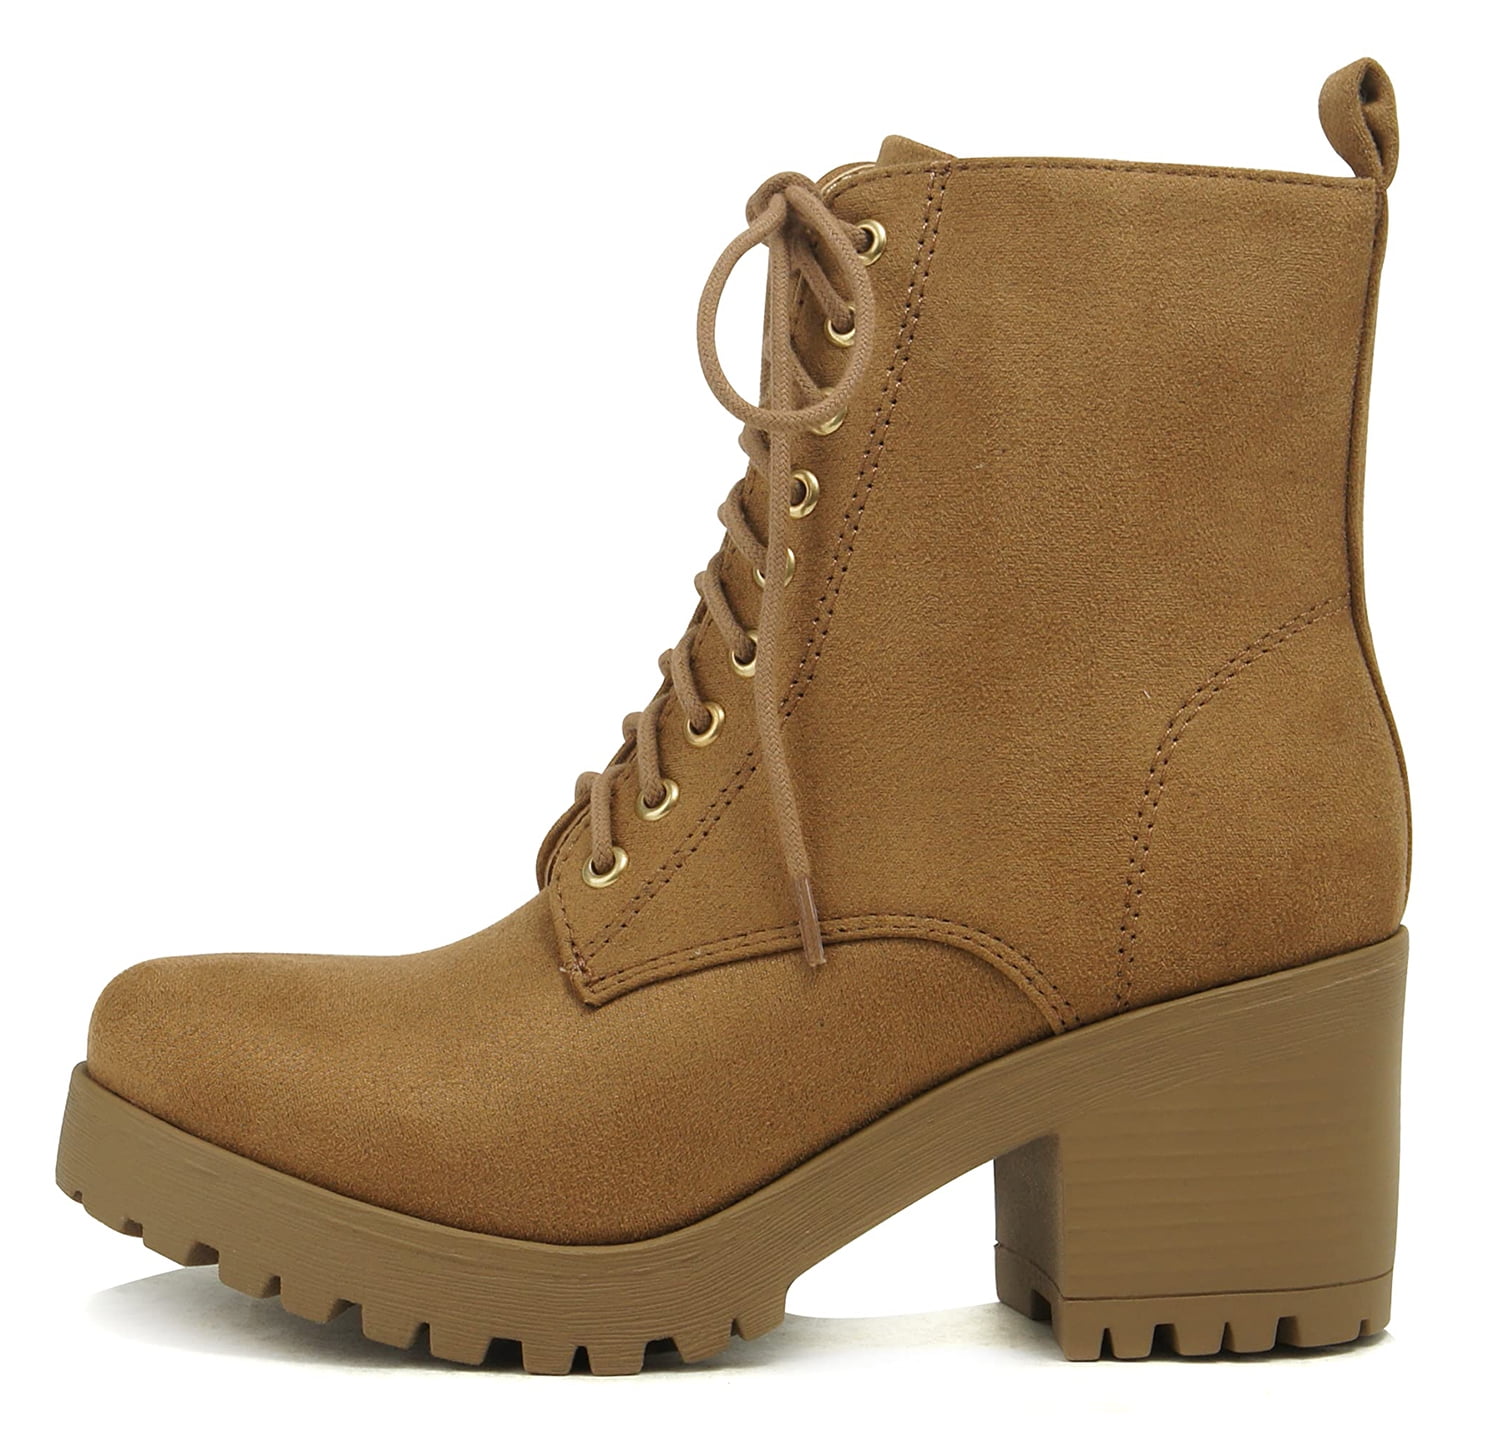 Buckle Detail Chunky Heeled Combat Boots | SHEIN